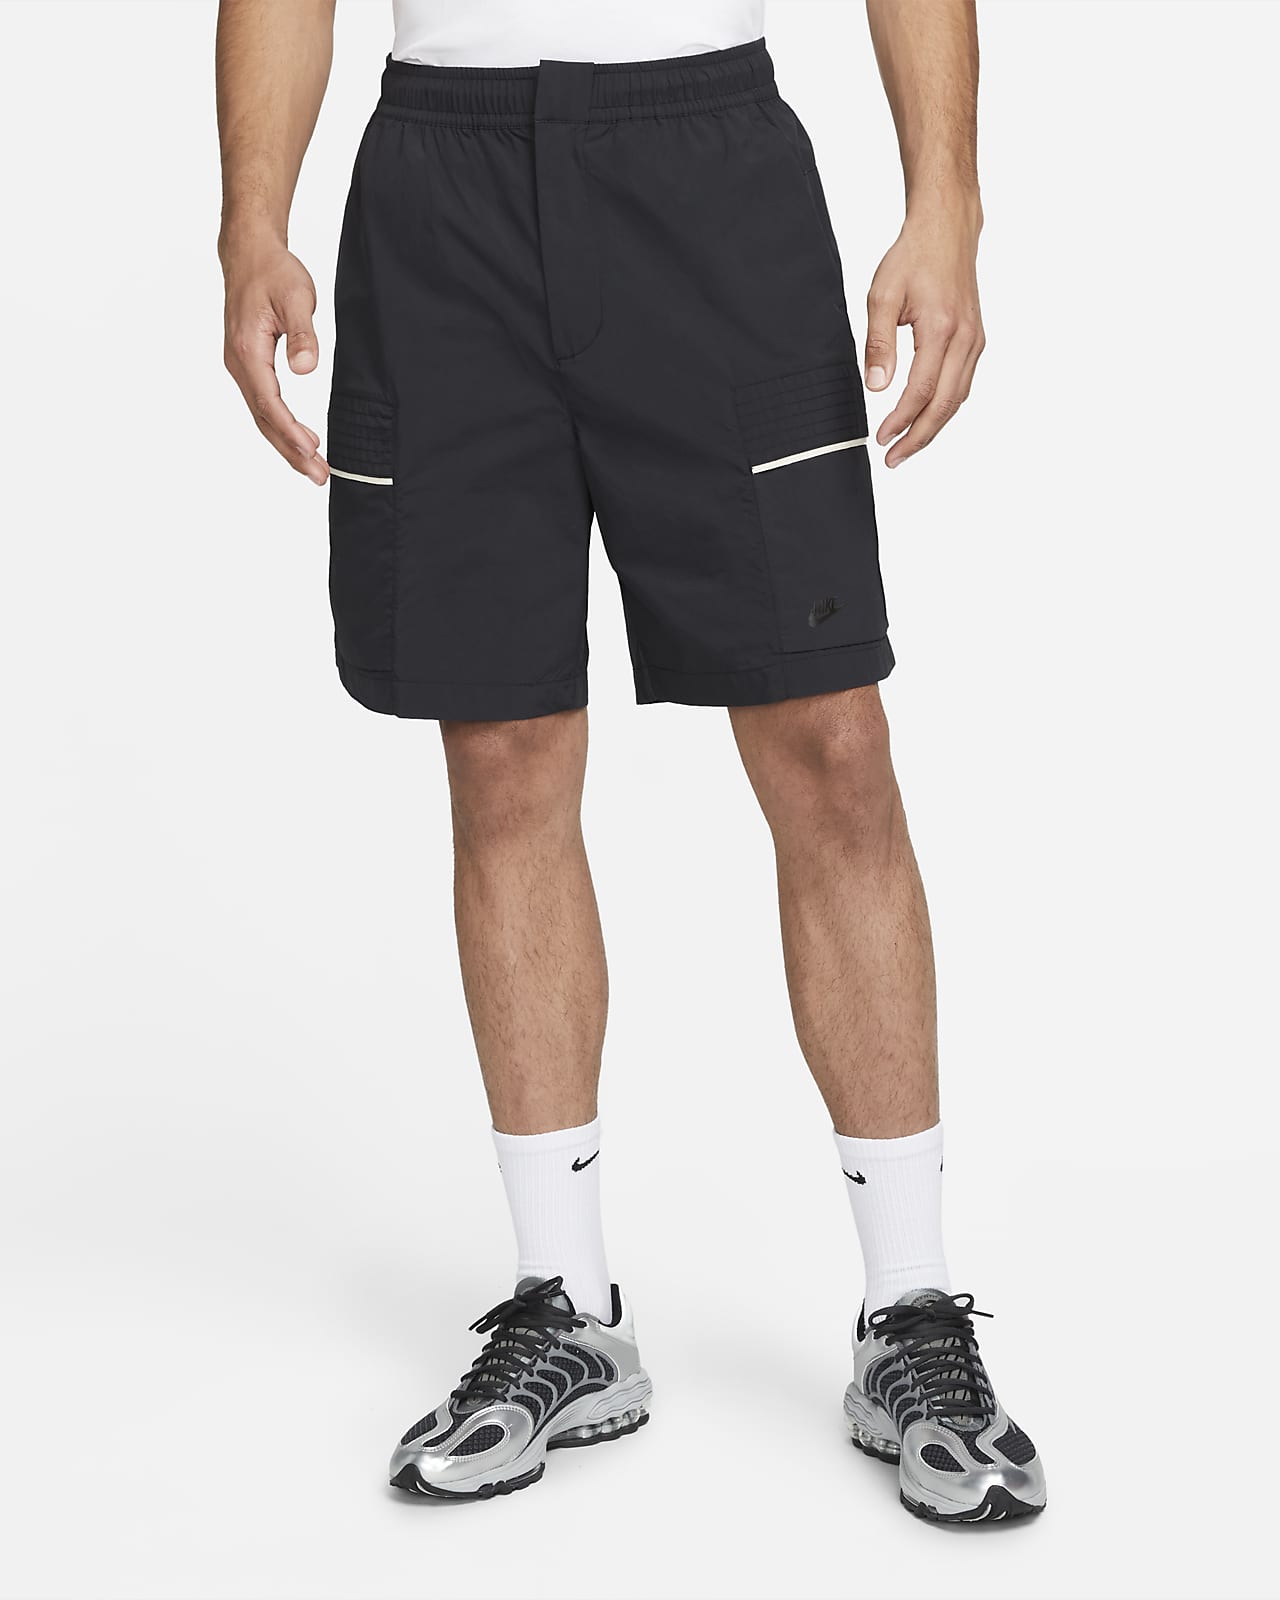 Essentials Boy's Active Performance Woven Soccer Shorts